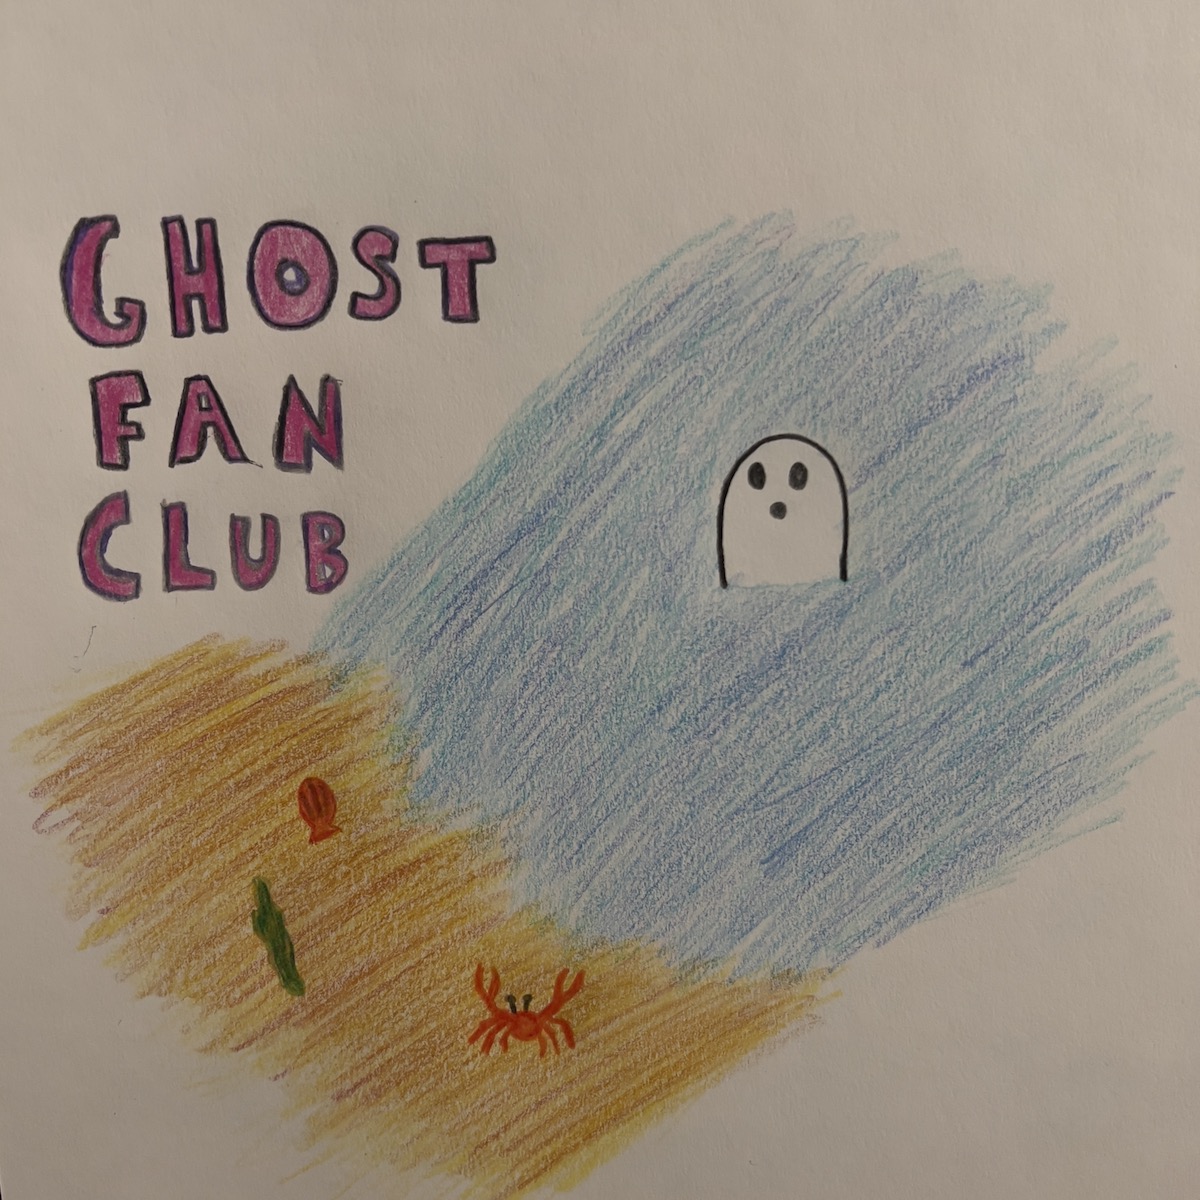 LISTEN: “Now and Then” by Ghost Fan Club